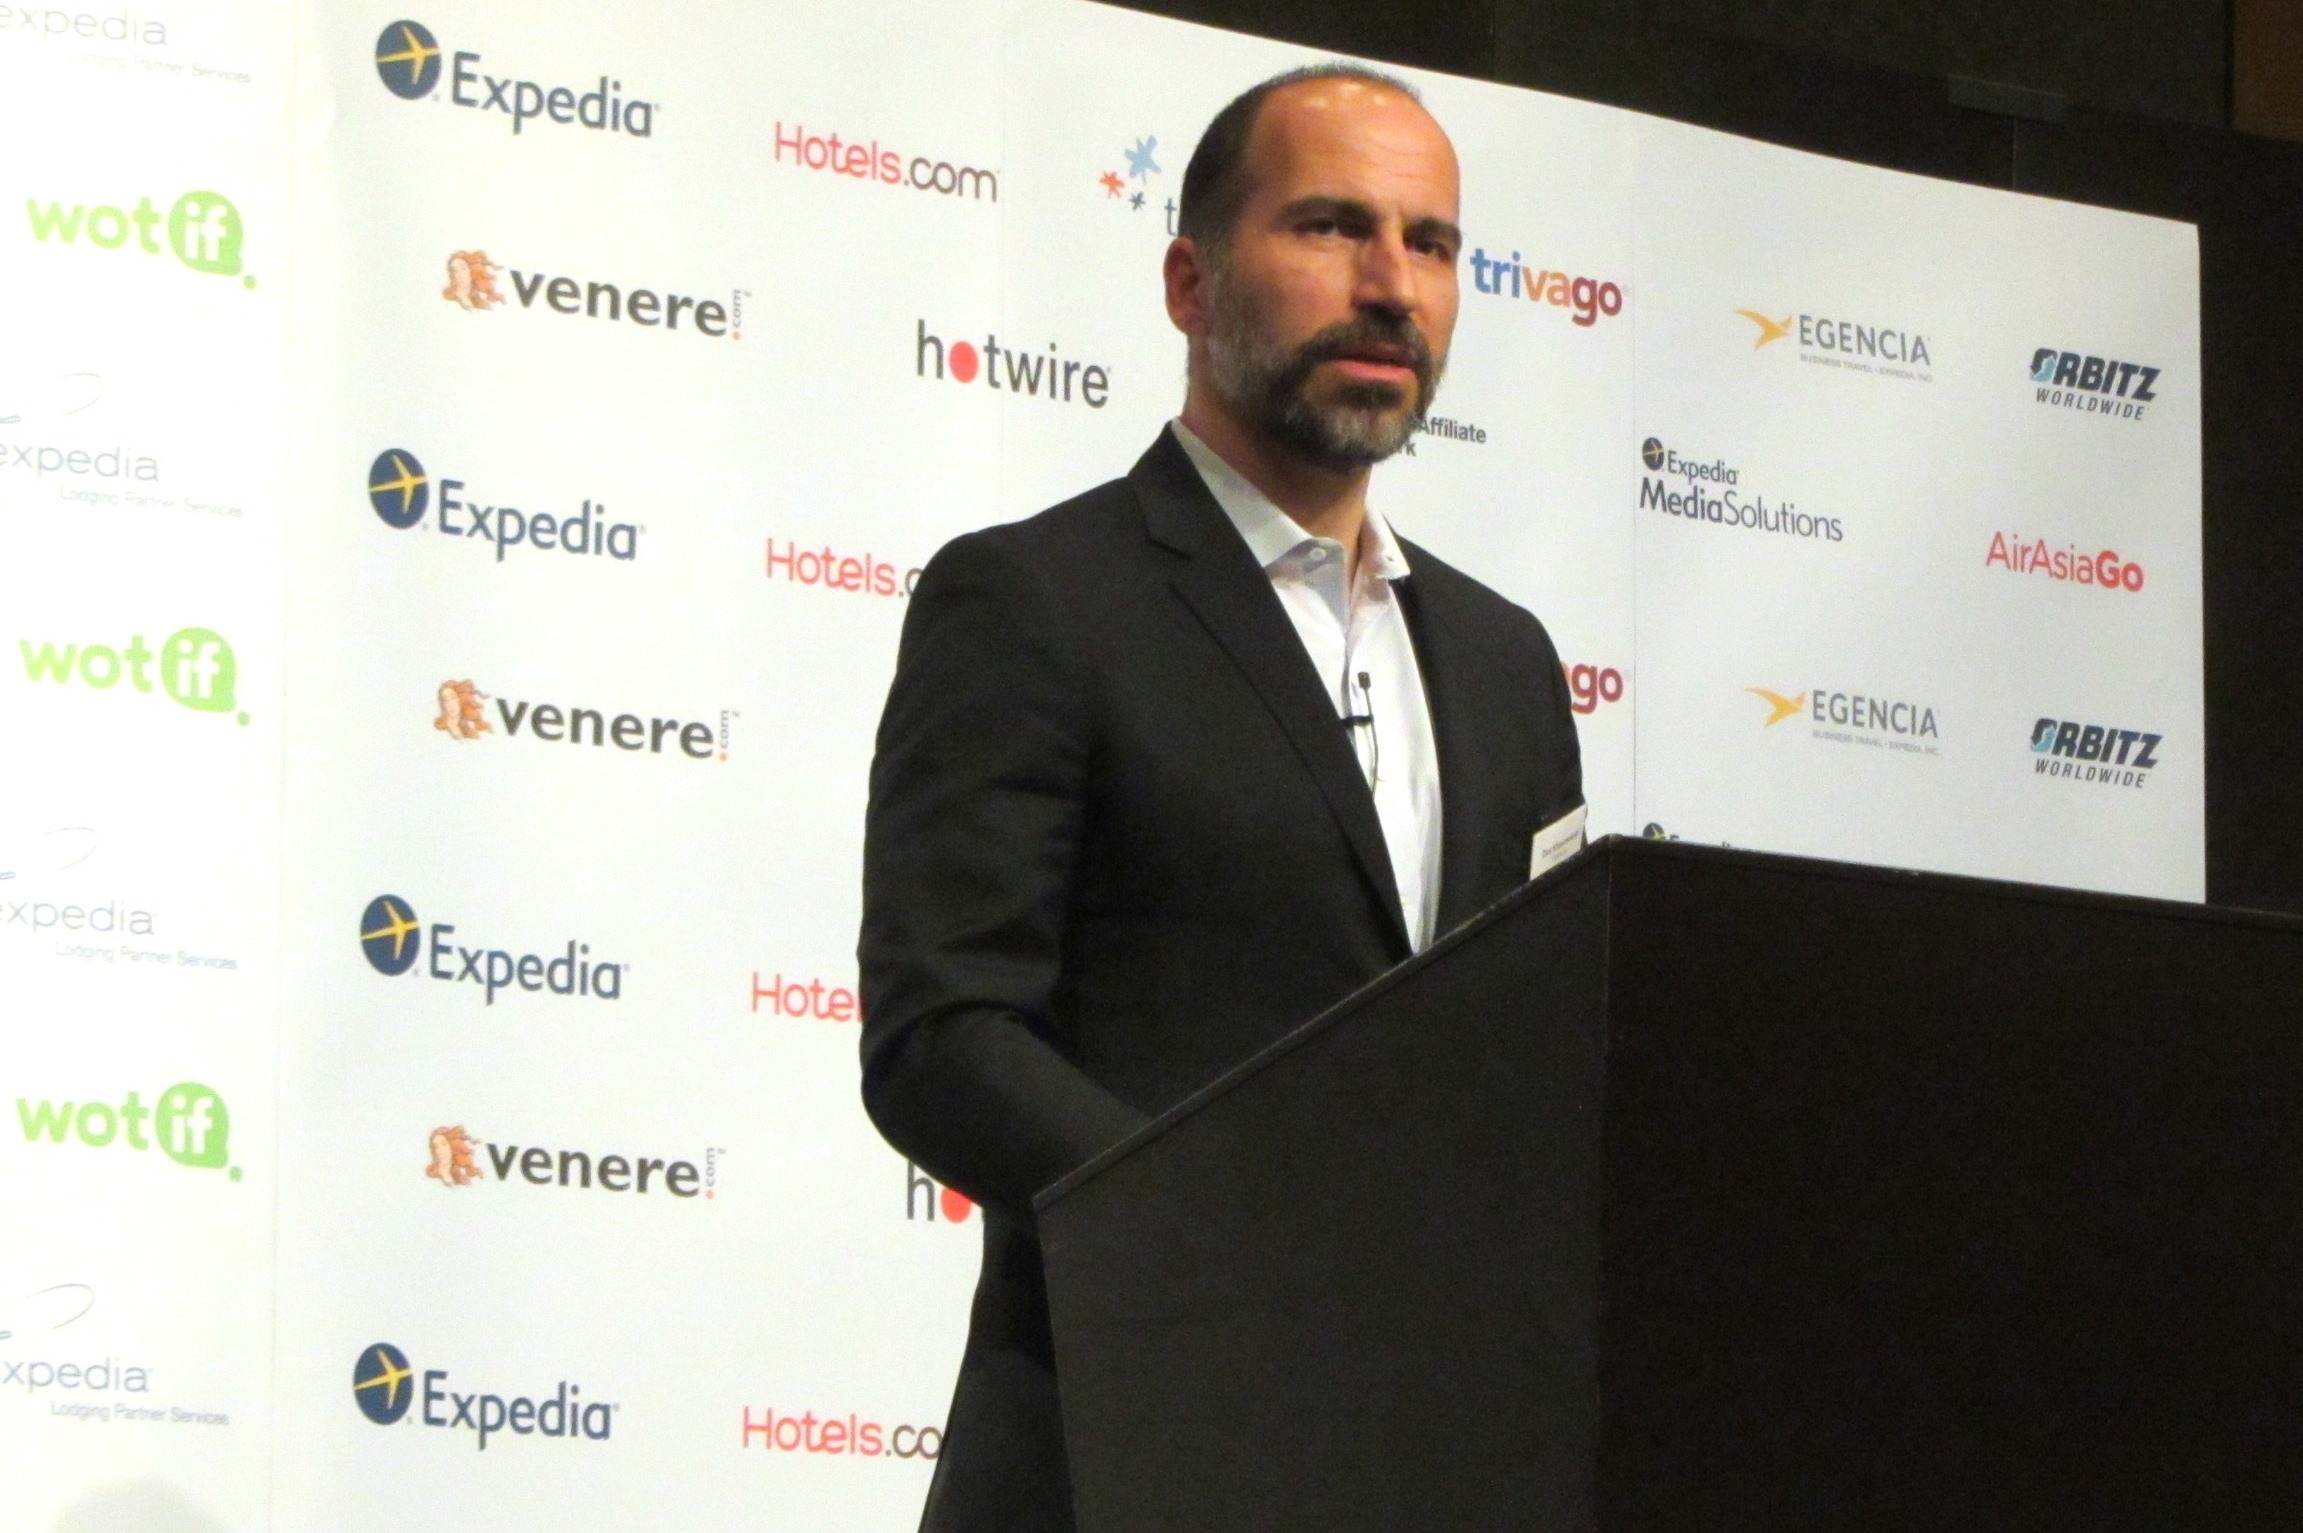 Placing Japan as the top priority market, Expedia CEO talks about keys to increase lodging guests